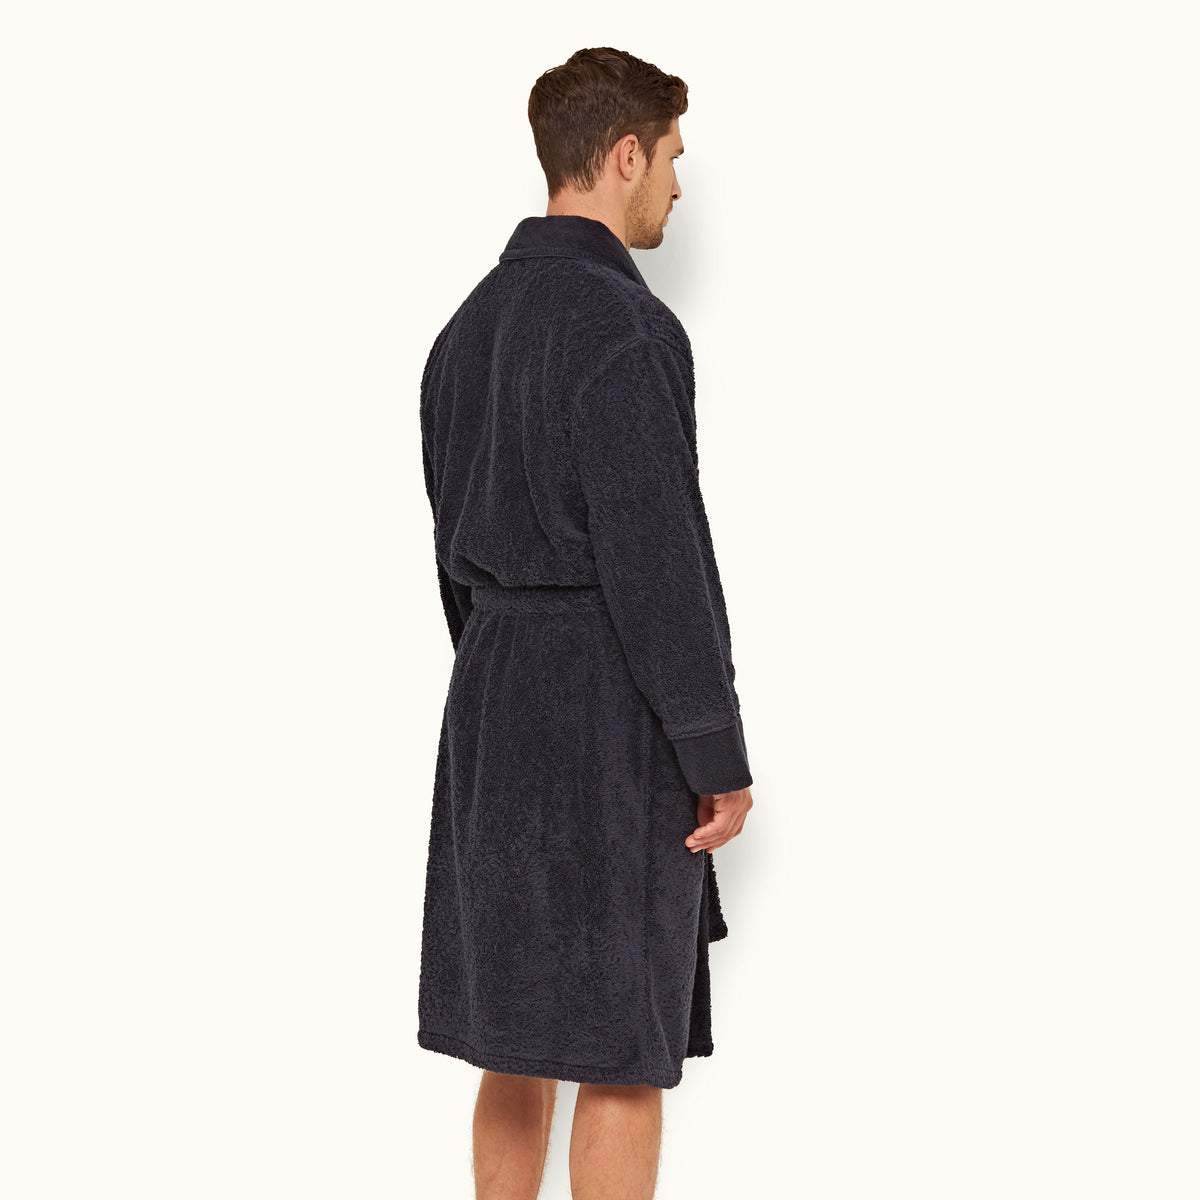 James Bond Midnight Navy 007 Dr. No Towelling Robe - By Orlebar Brown